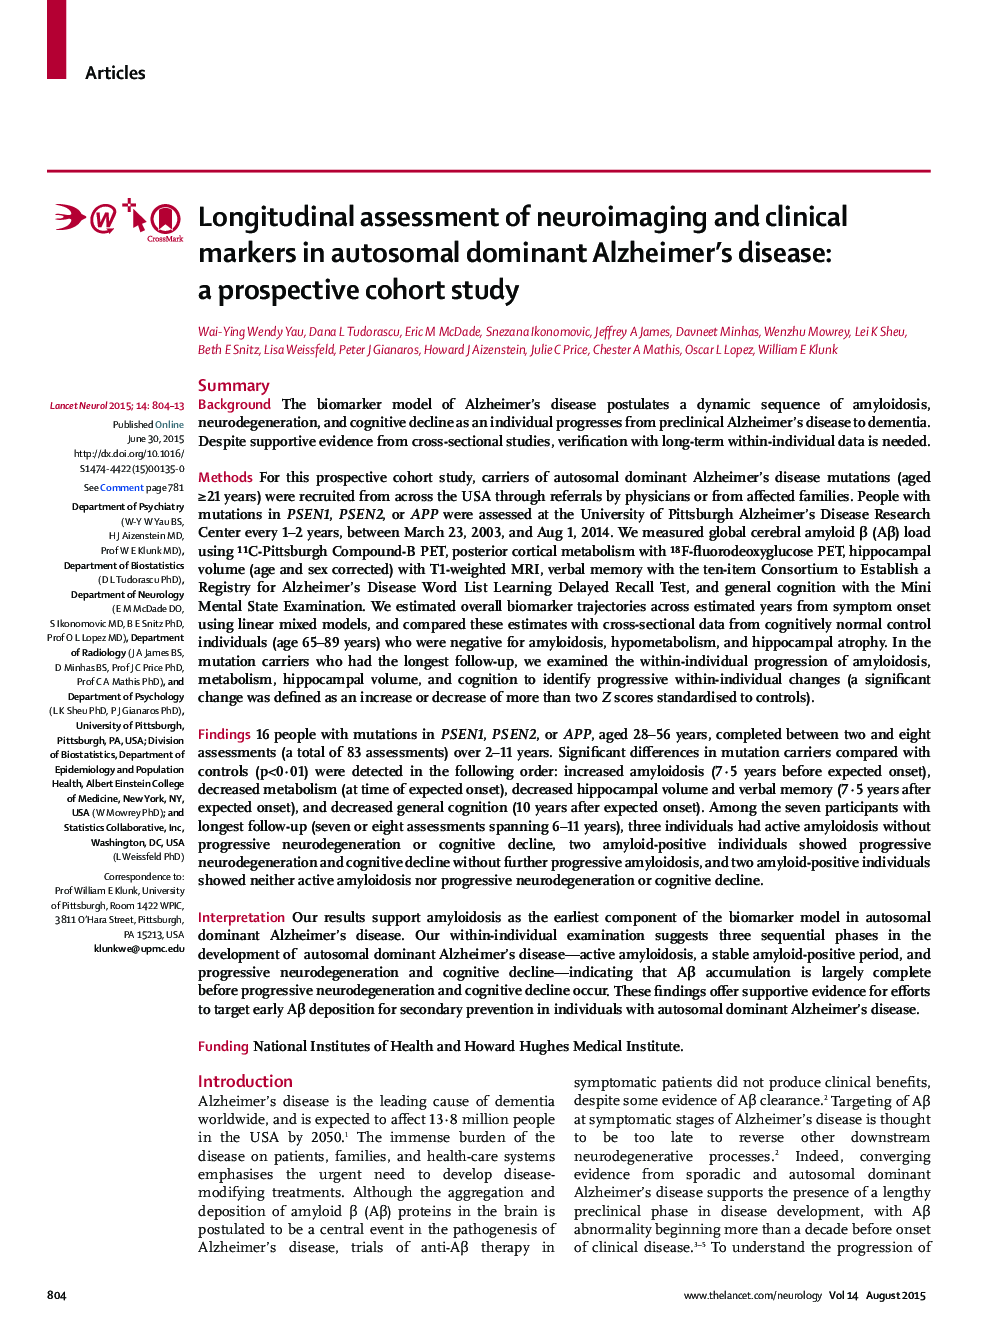 Longitudinal assessment of neuroimaging and clinical markers in autosomal dominant Alzheimer's disease: a prospective cohort study